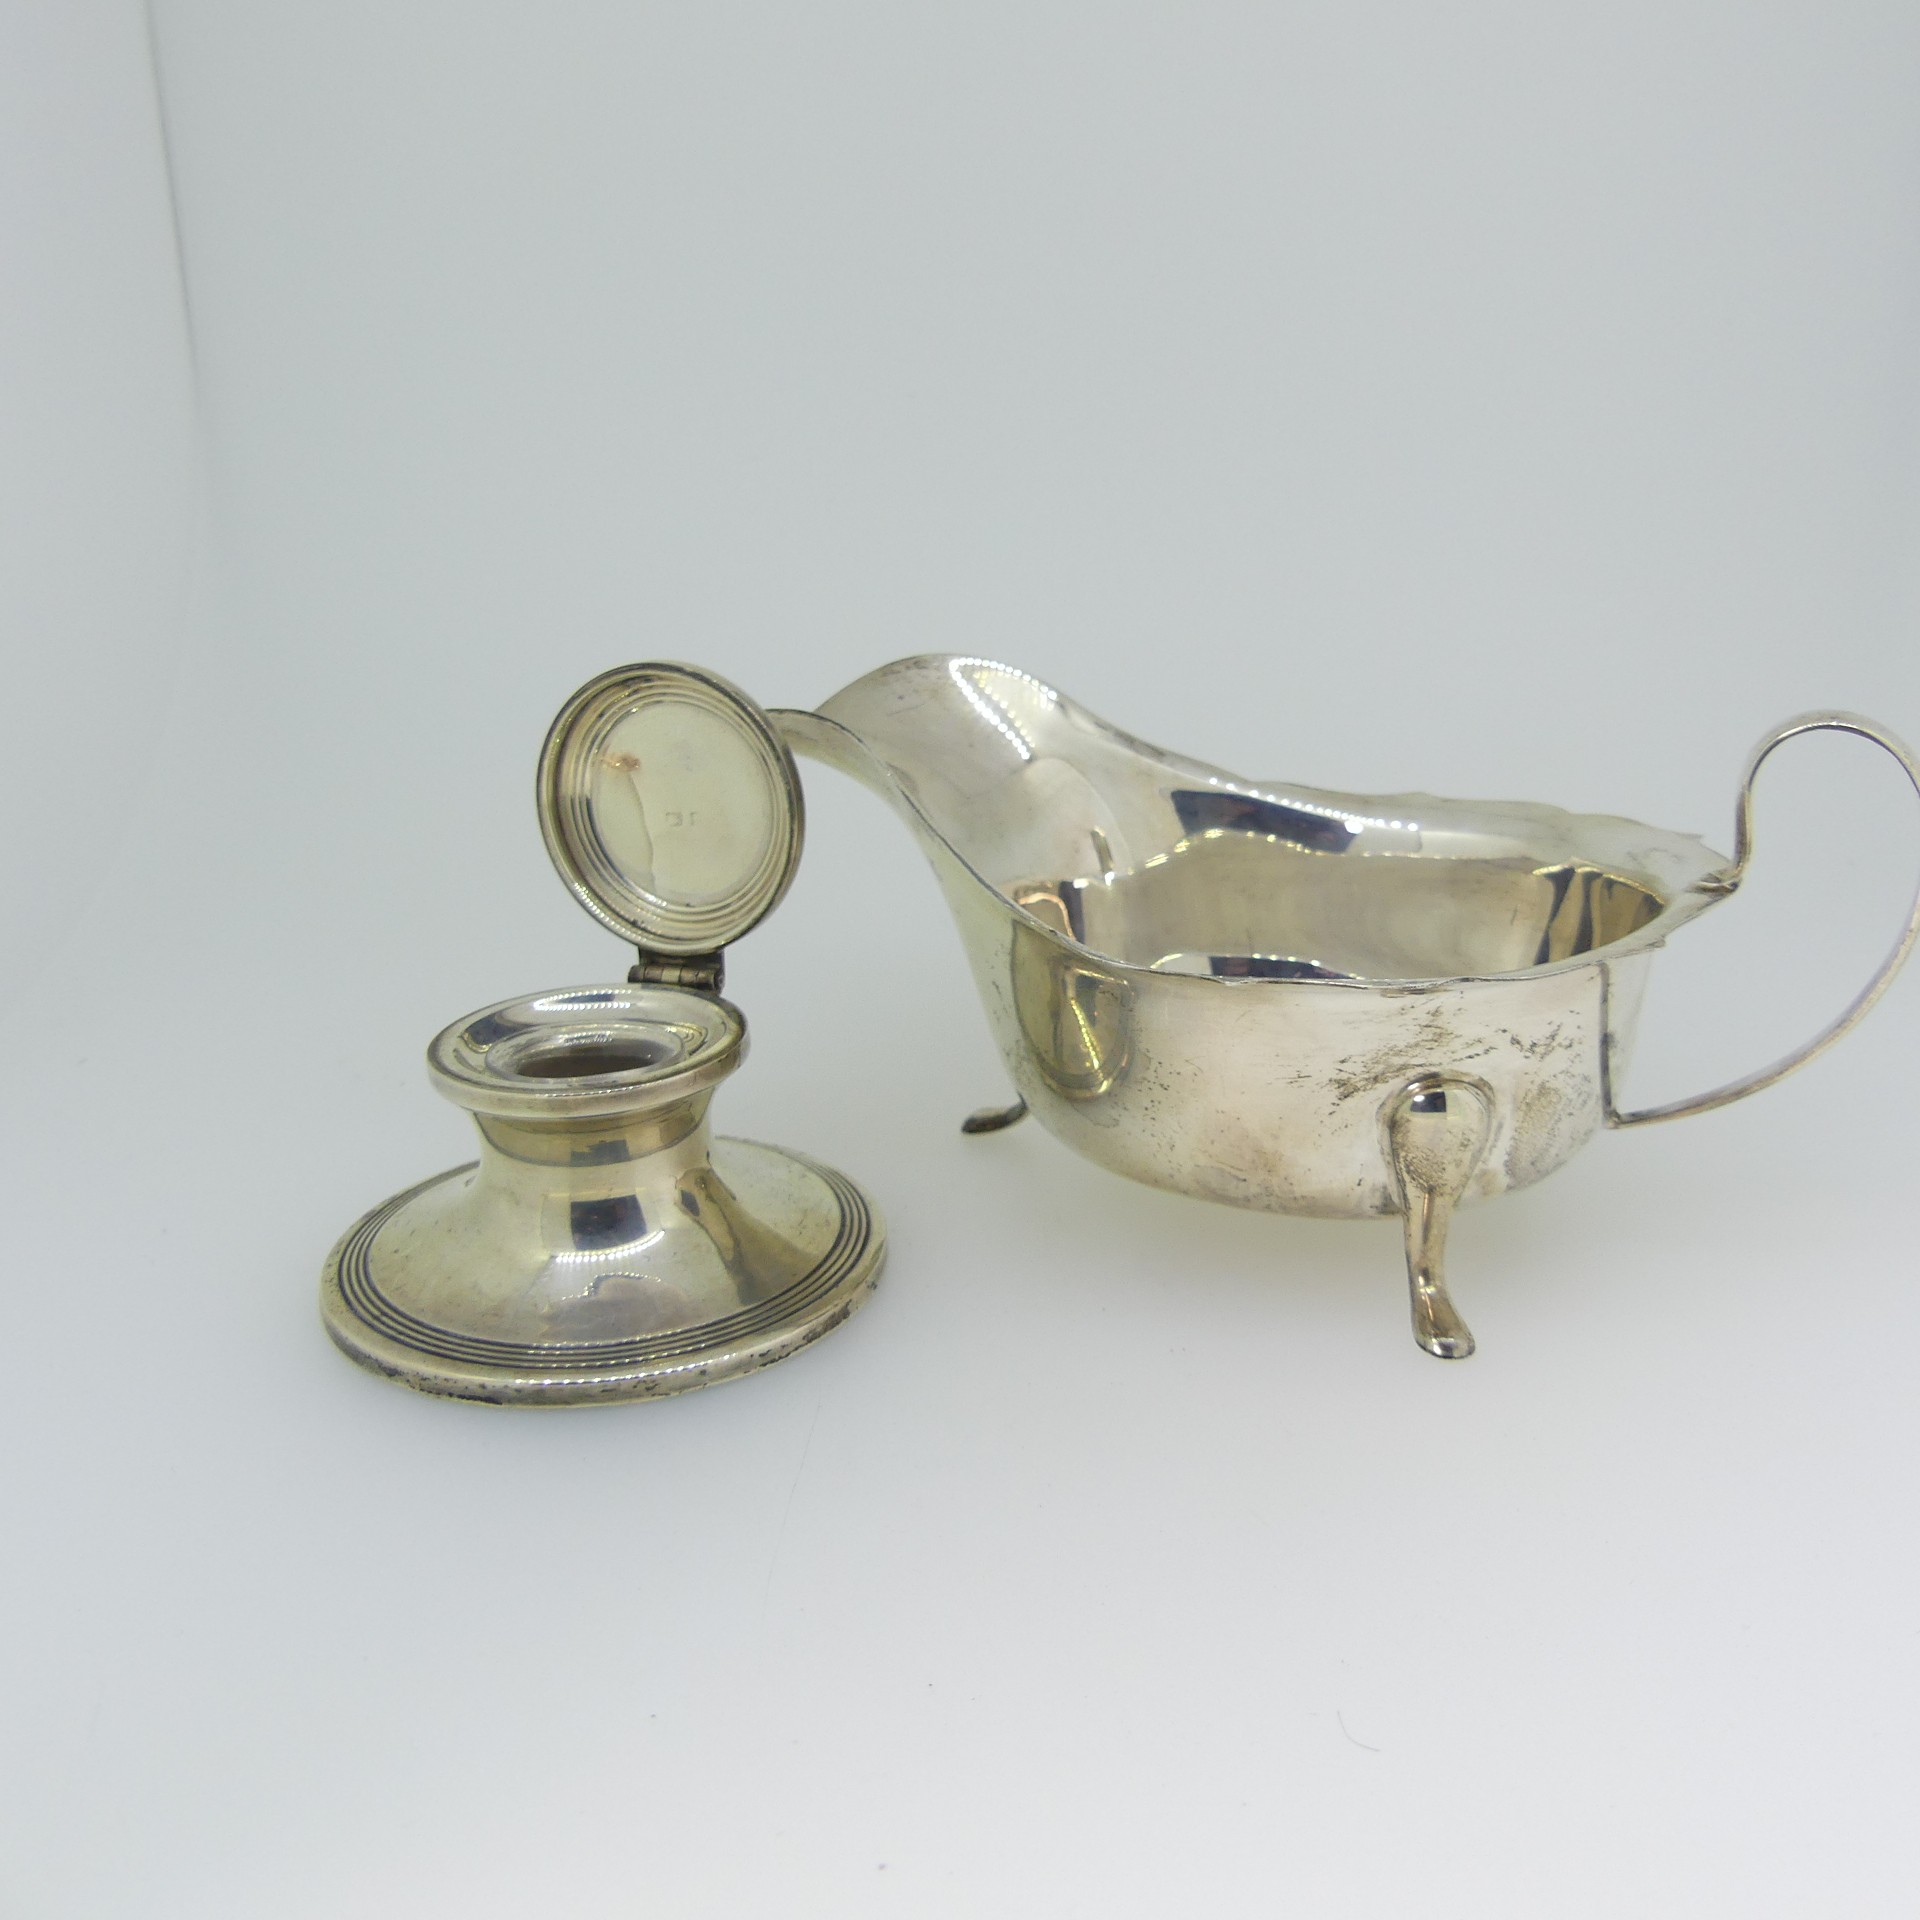 An Edwardian silver Capstan Inkwell, hallmarked Birmingham 1909, of traditional form with reeded